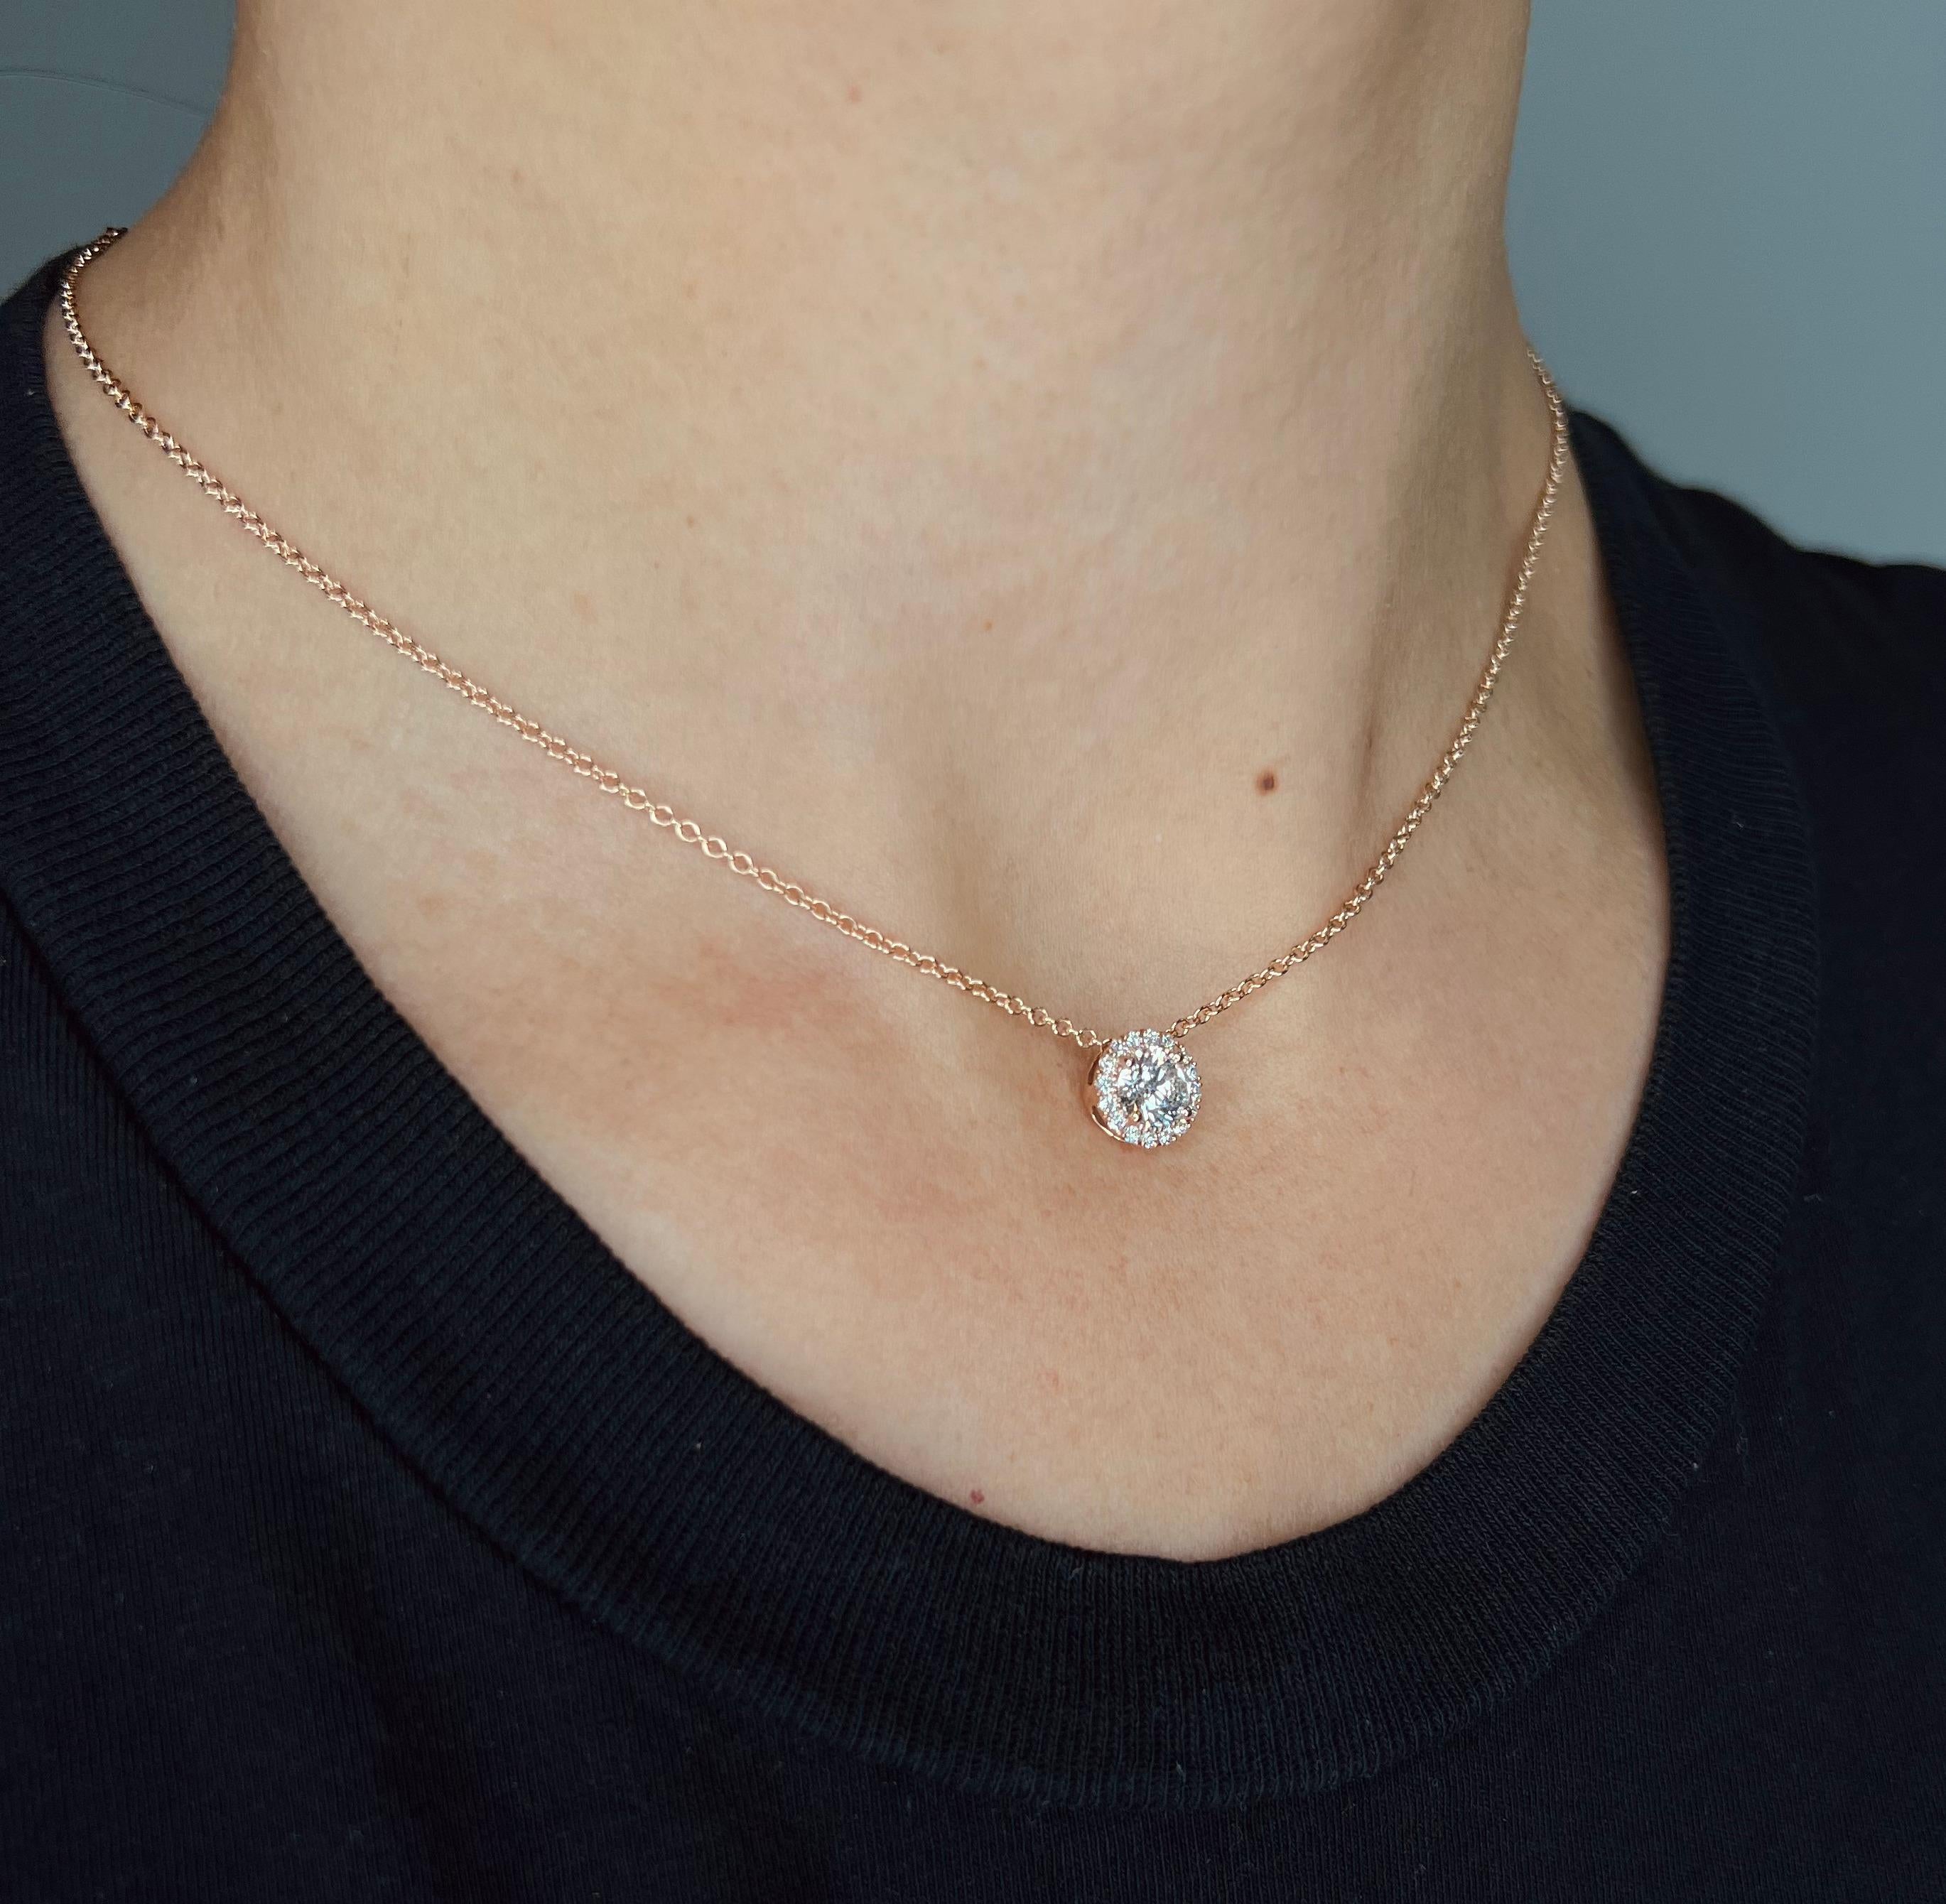 This diamond circle pendant provides a glowing chic look.
Metal: 14k Gold
Diamond Total Carats (Includes 0.15ct halo): 0.65 Total (0.50ct Center)
Diamond Cut: Round Natural Diamonds (Not Lab Grown)
Diamond Clarity: VS
Diamond Color: F-G
Color: White